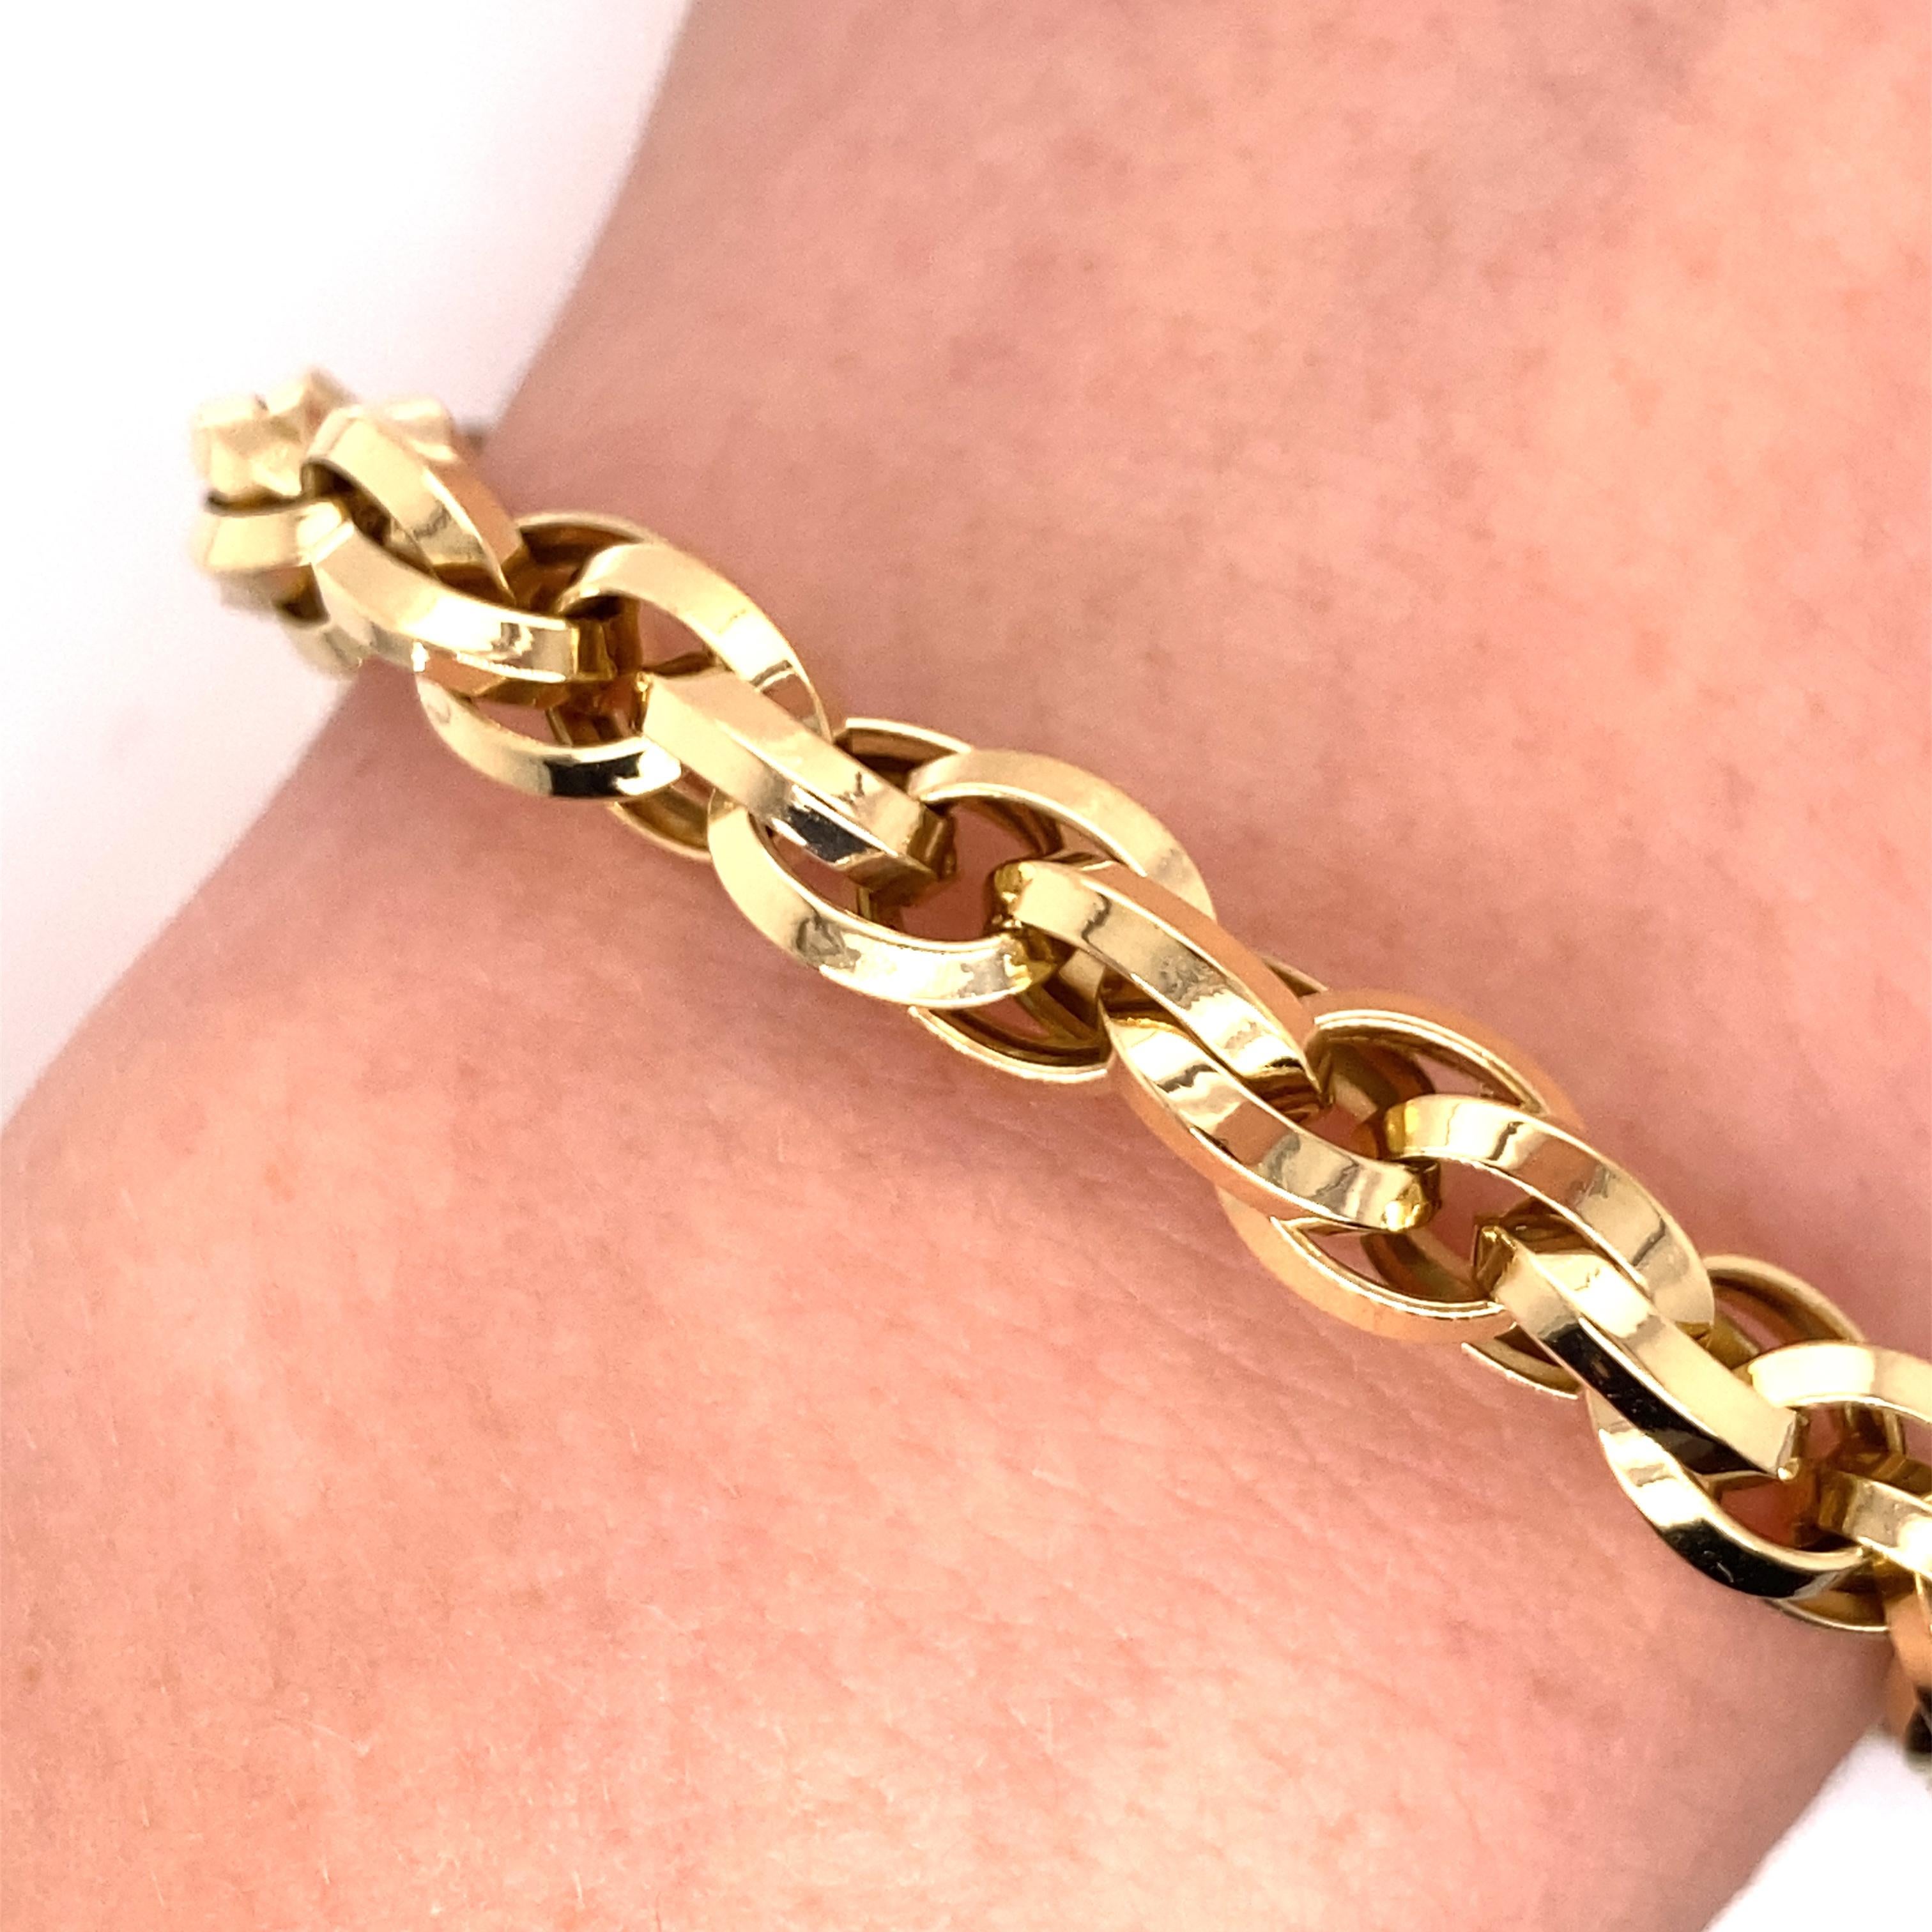 Vintage 2000's 18K Yellow Gold Triple Cable Link Bracelet - The bracelet measures .25 inches wide and 7.25 inches long and features a spring ring clasp. The bracelet is stamped 18K, and Italy. The bracelet weighs 12.27 grams of gold. 